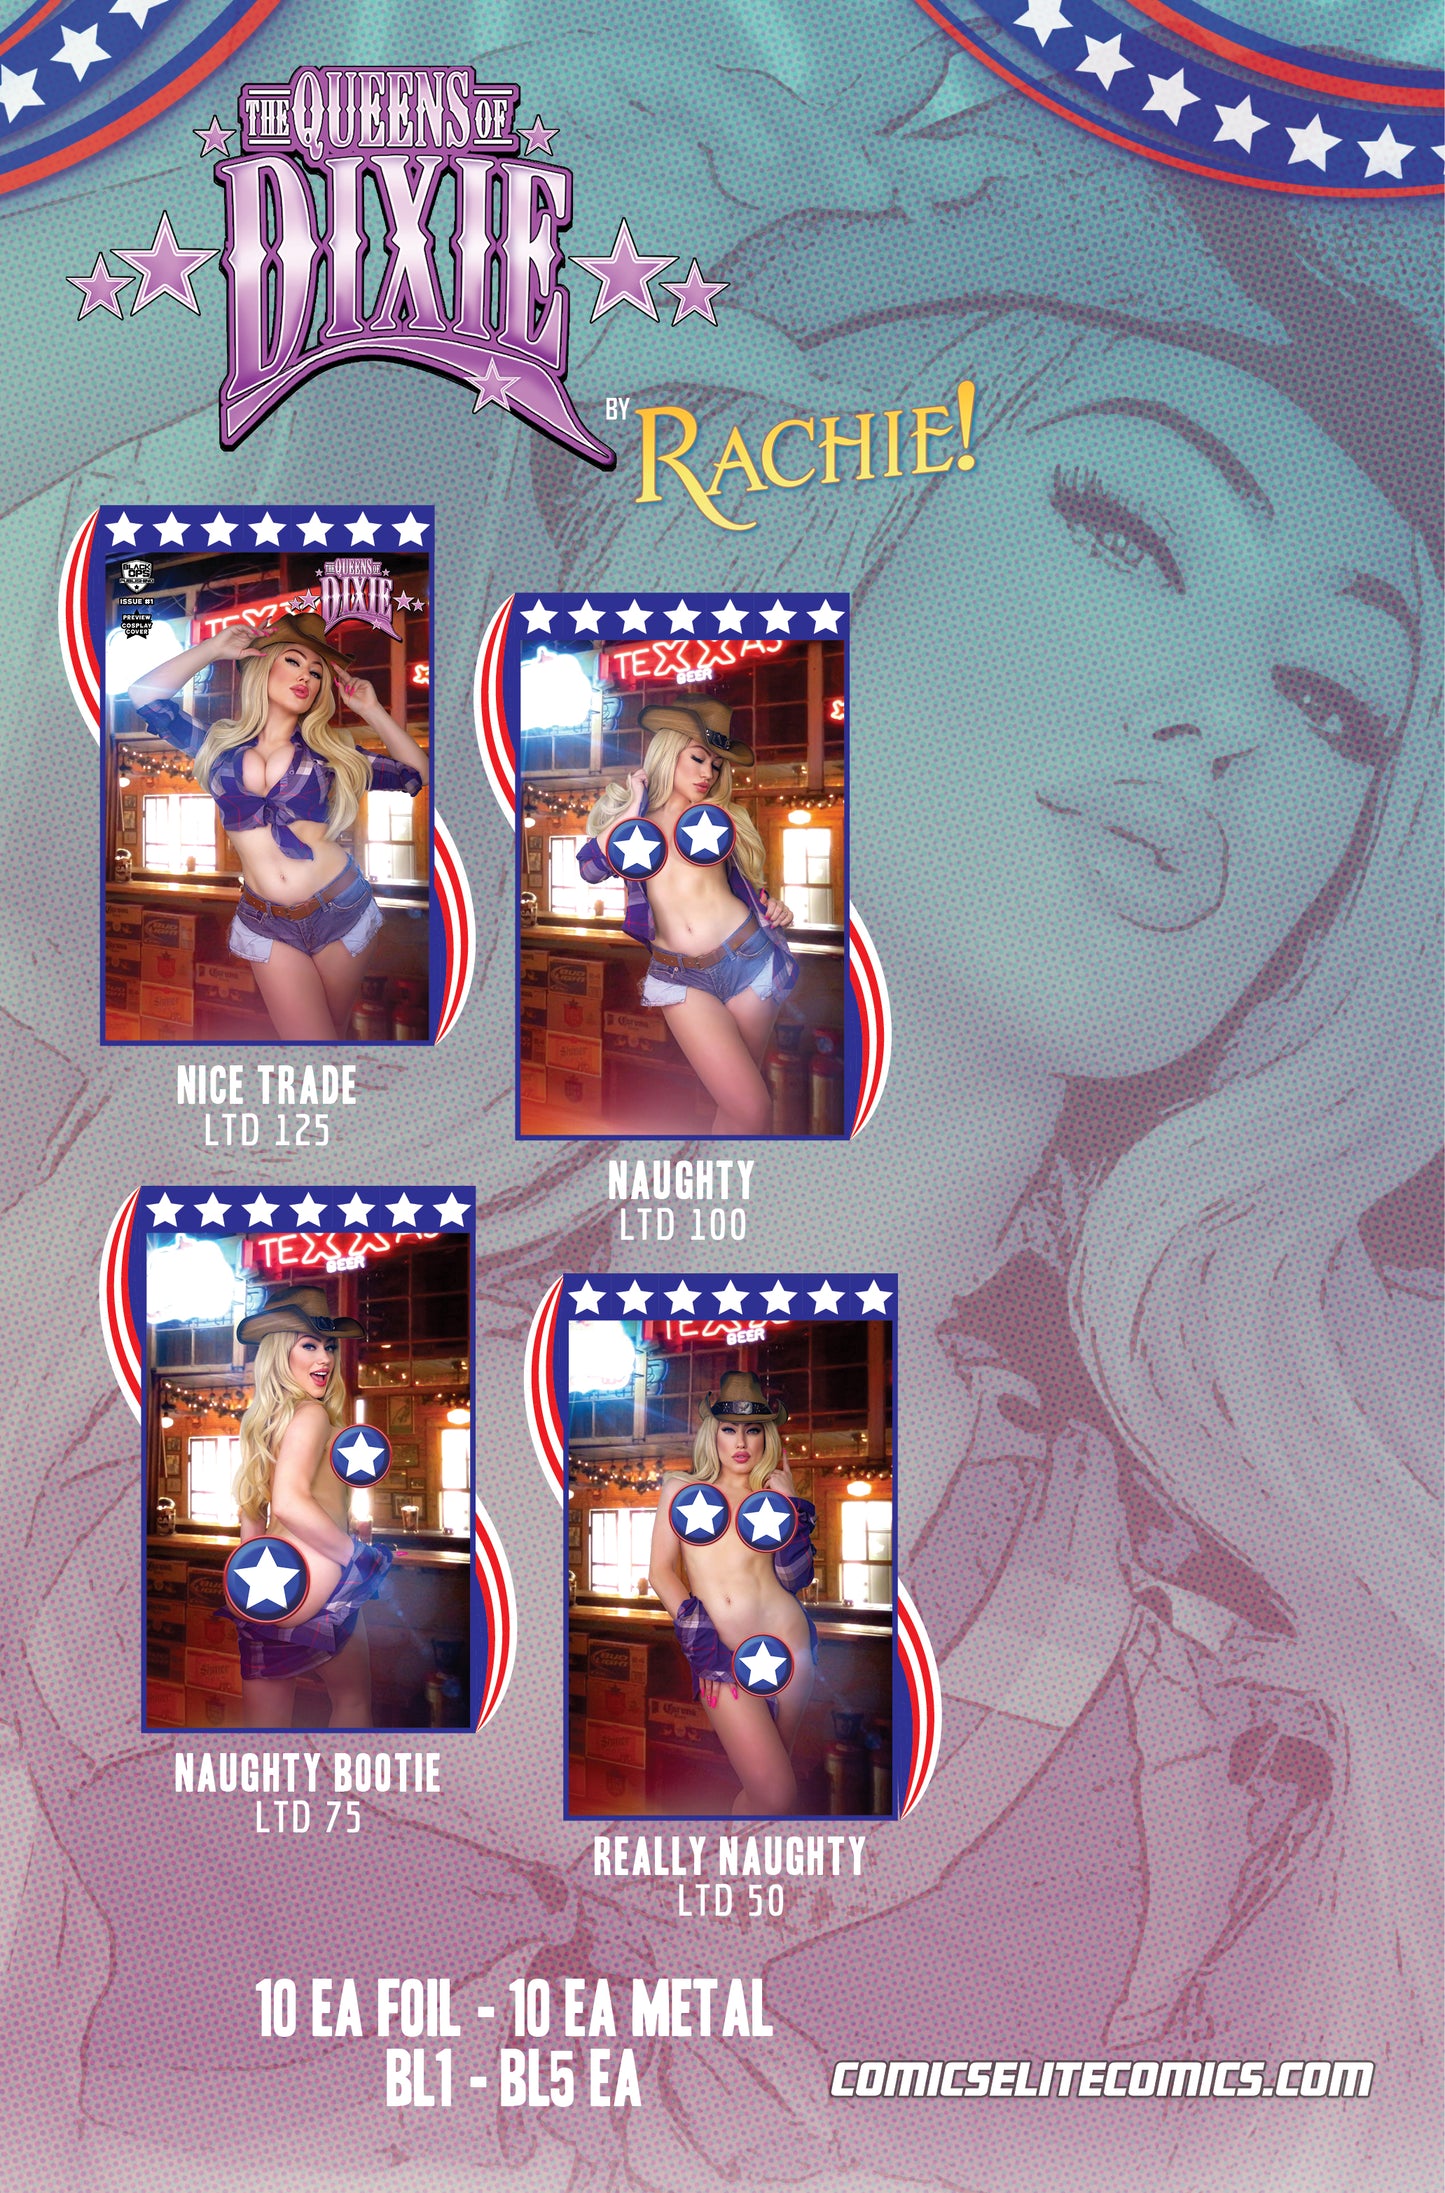 SIGNED W/ COA - QUEENS OF DIXIE #1 PREVIEW - FACES BY RACHIE - NICE TRADE LTD 125